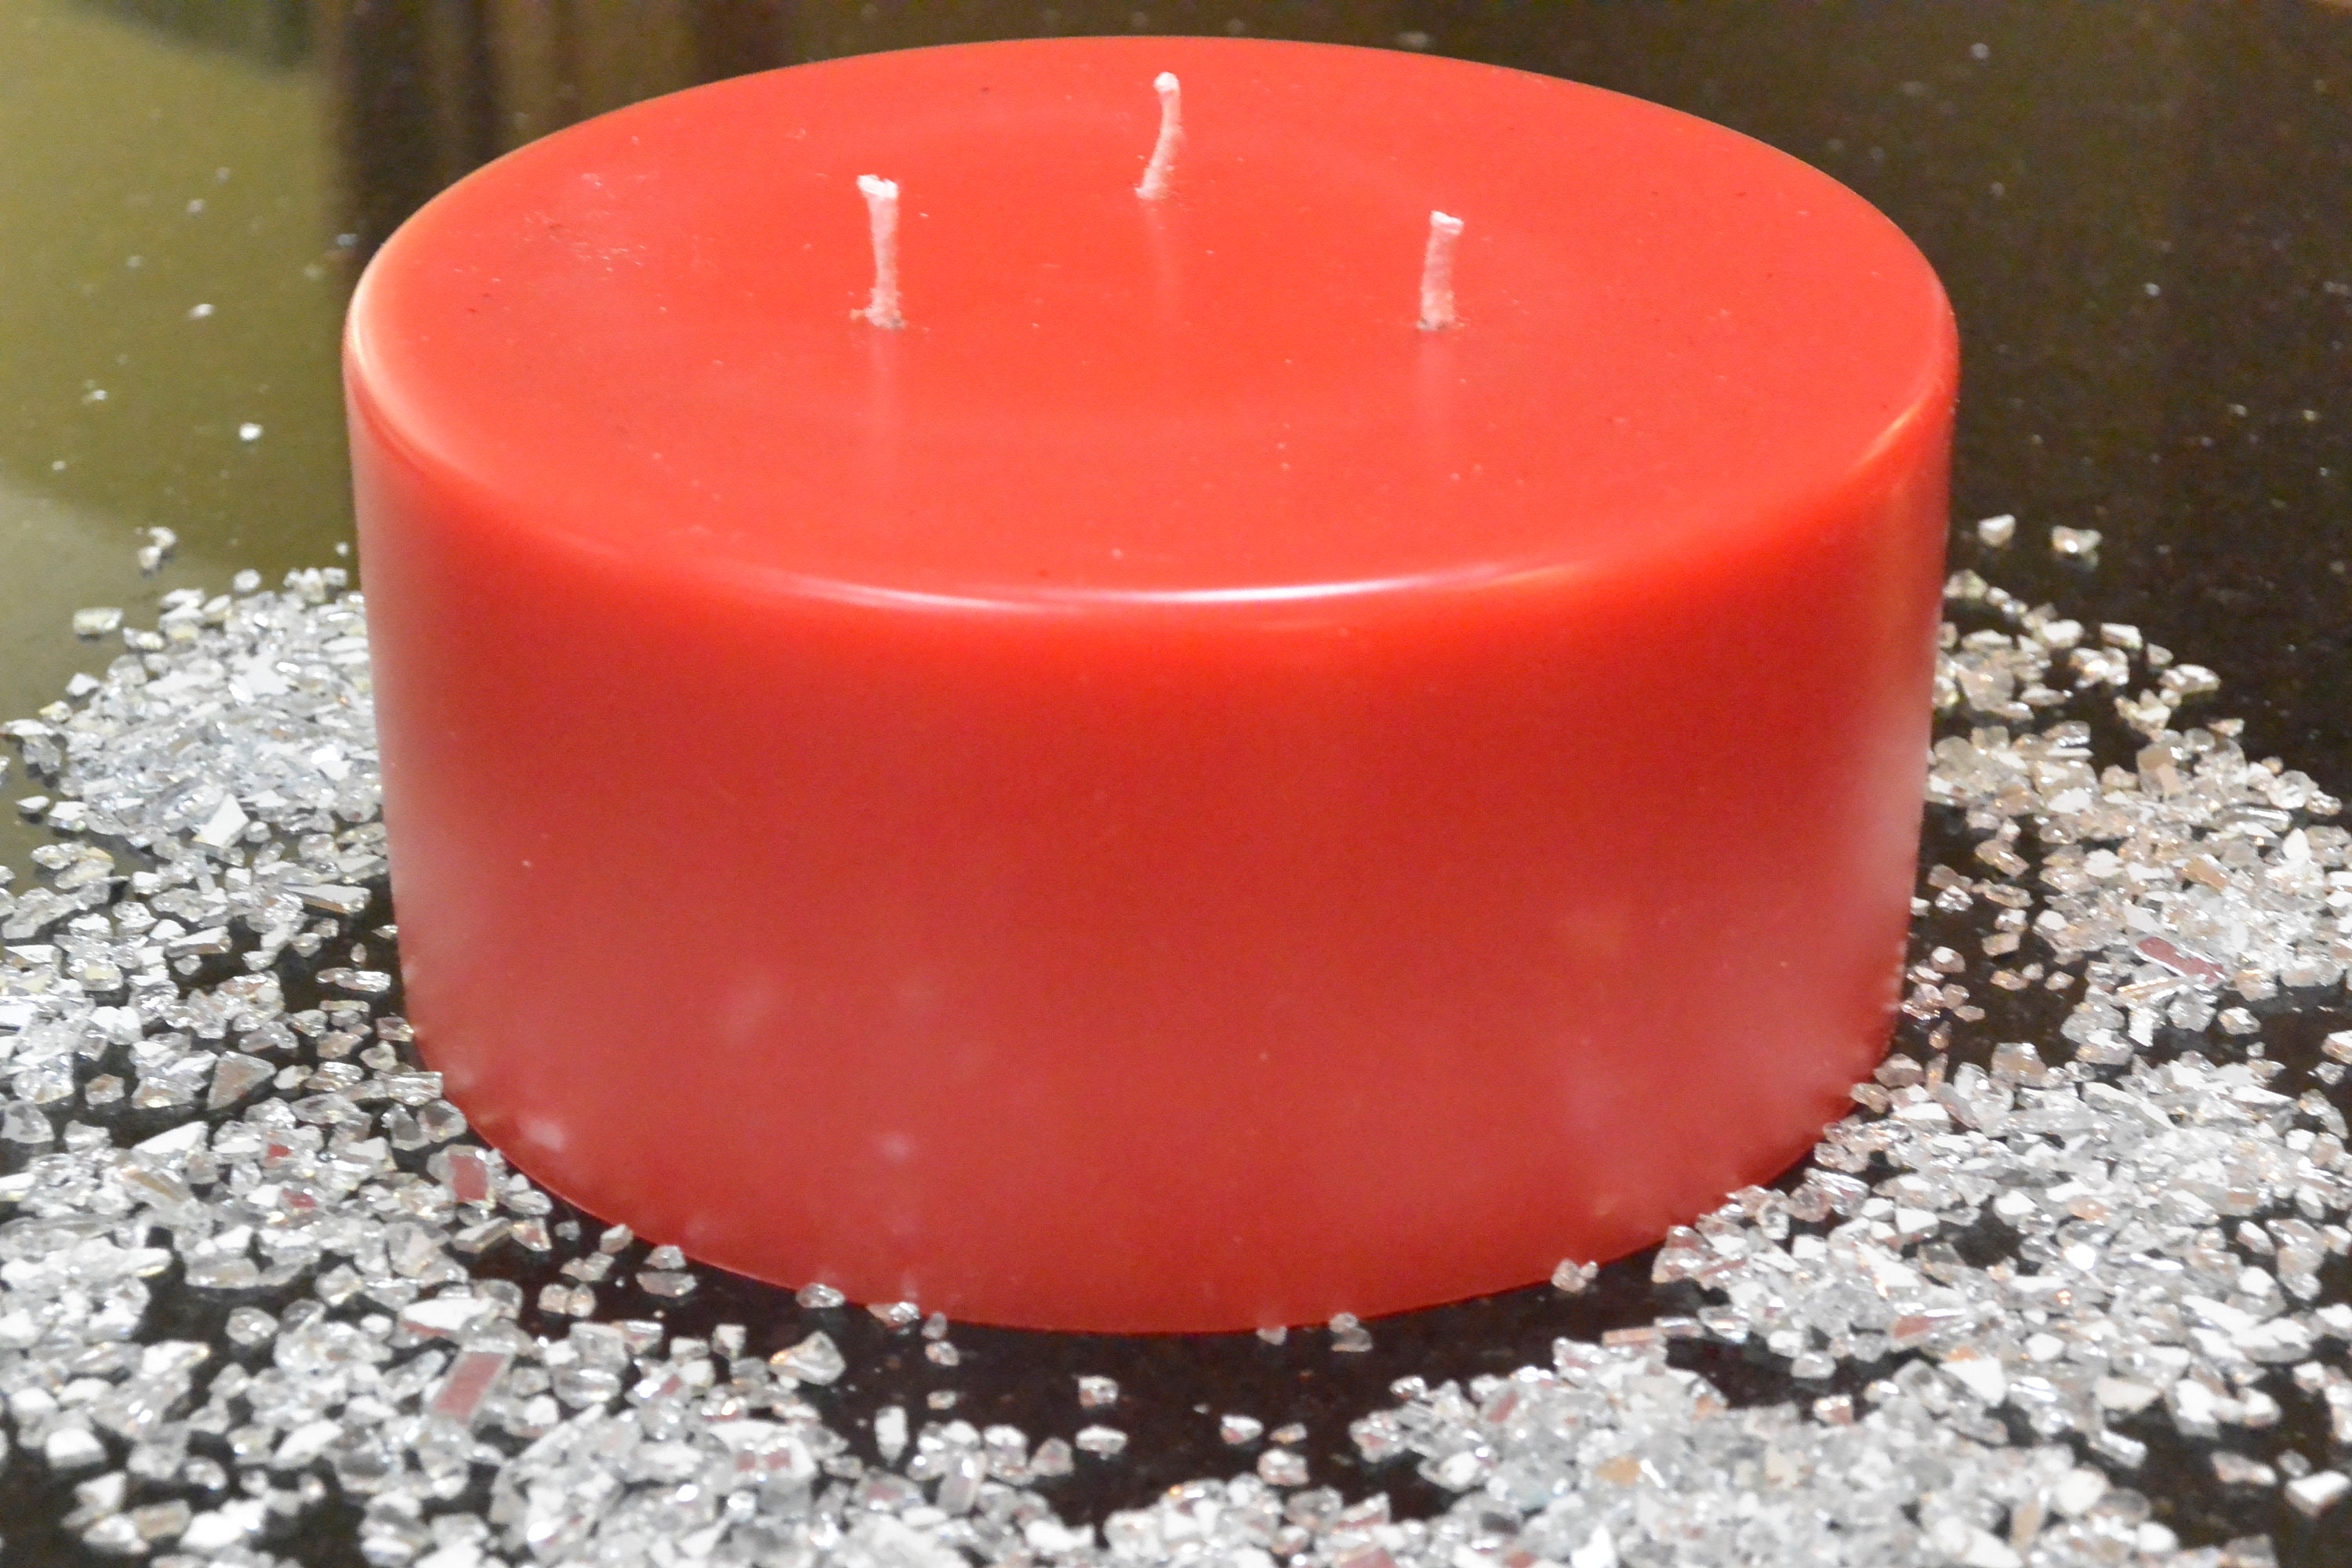 Custom hand poured 24 inch long block candle with 6 wicks